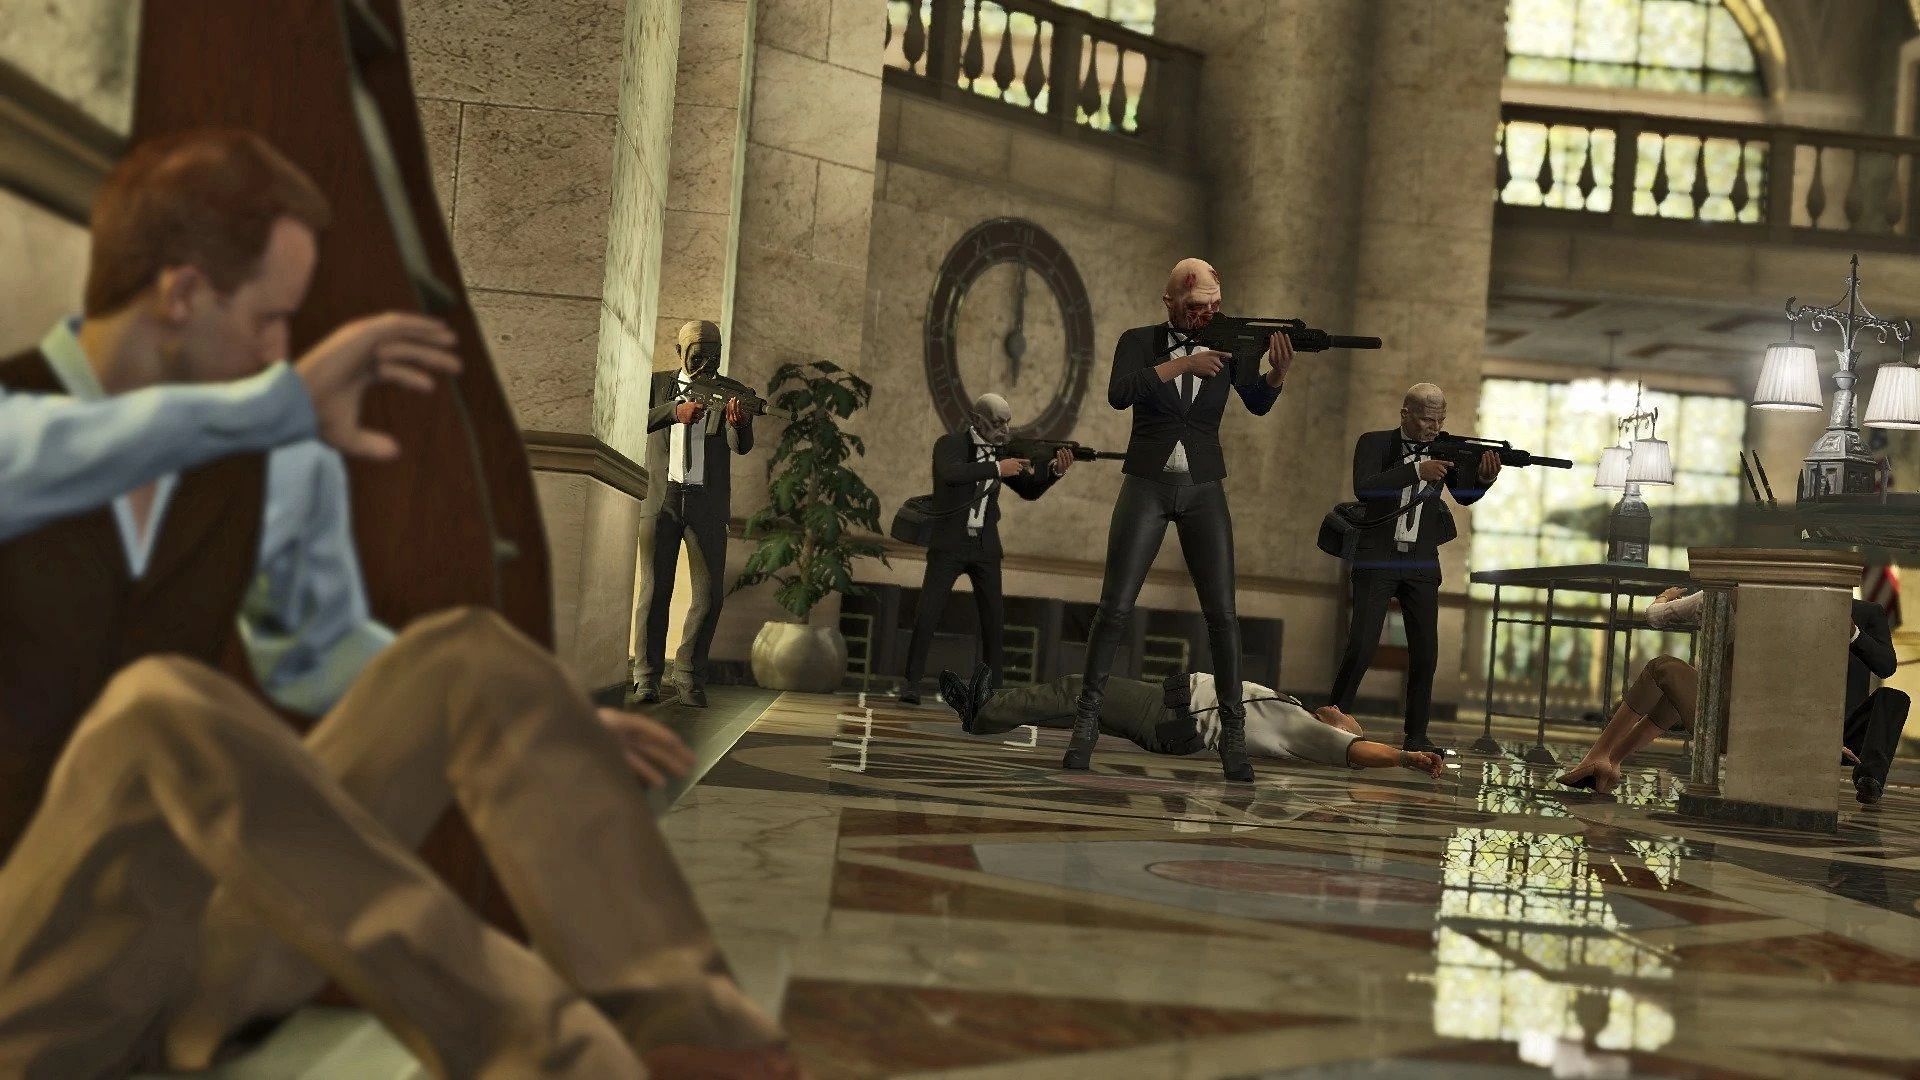 Heists are some of the most exciting missions in GTA Online (Image via GTA WiKi)